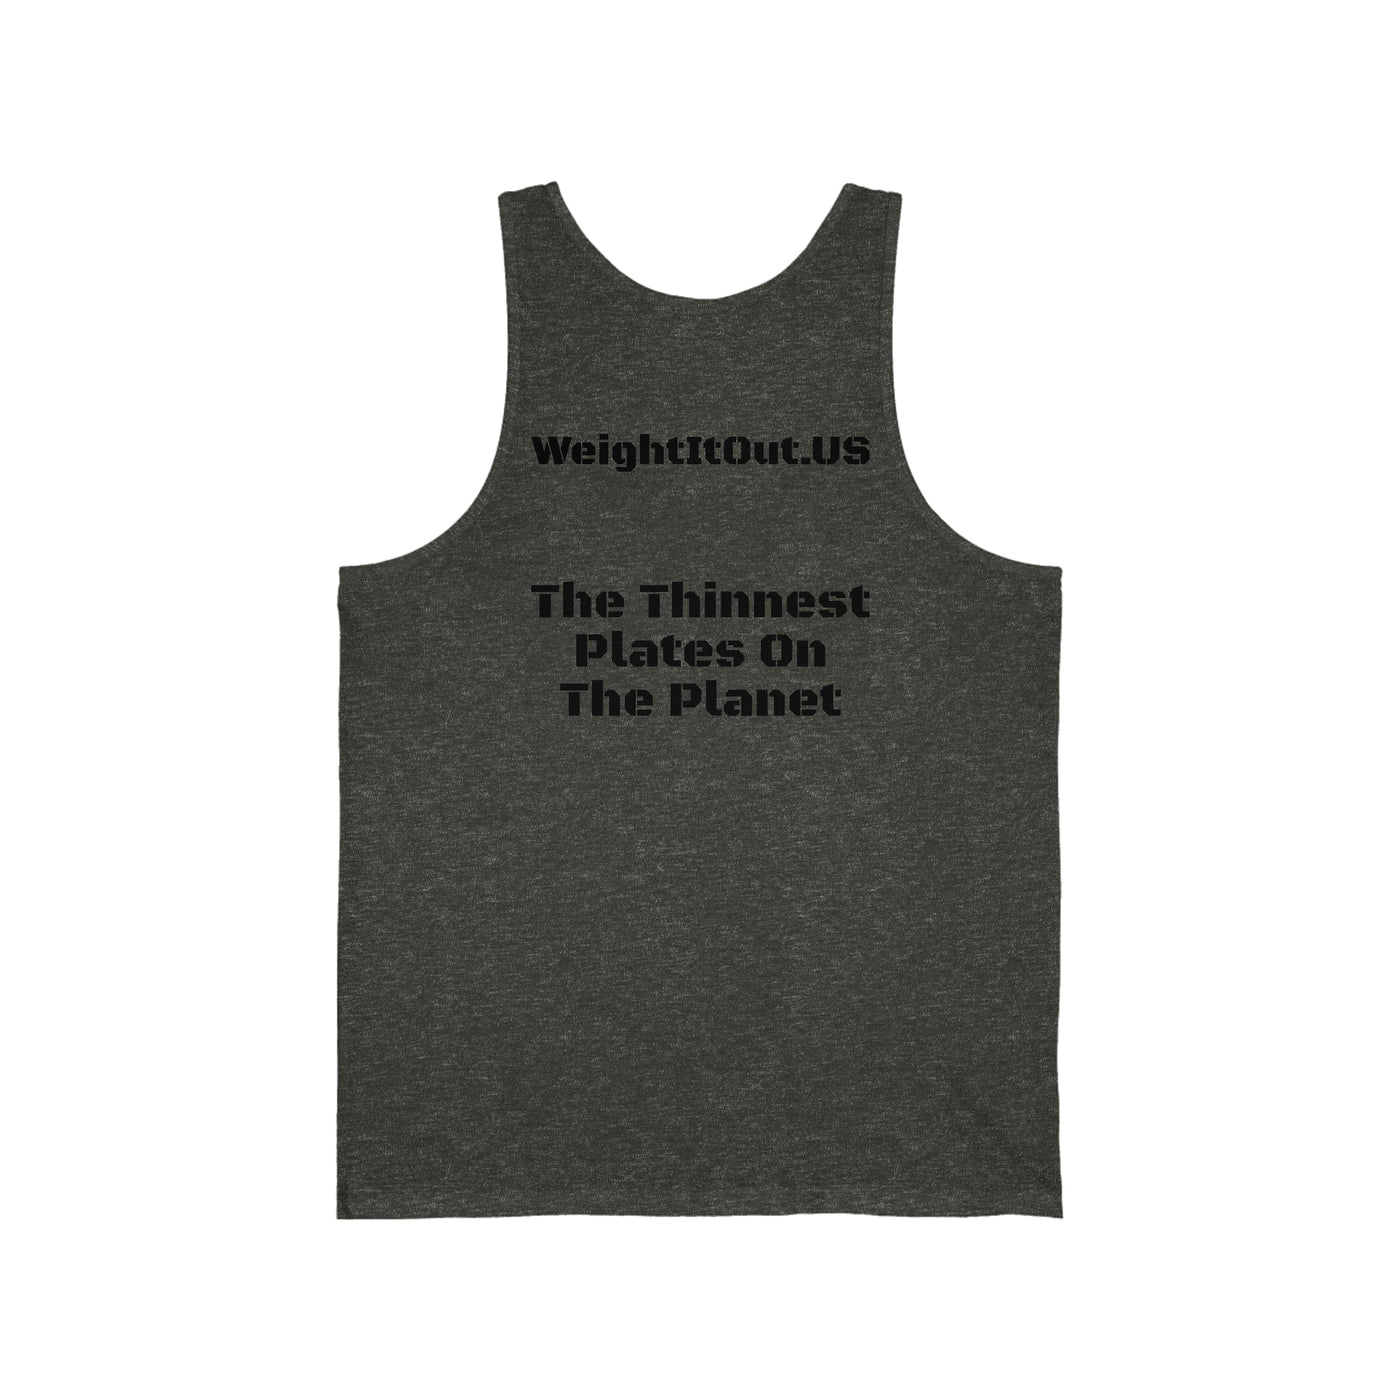 Weight It Out Classic Jersey Tank